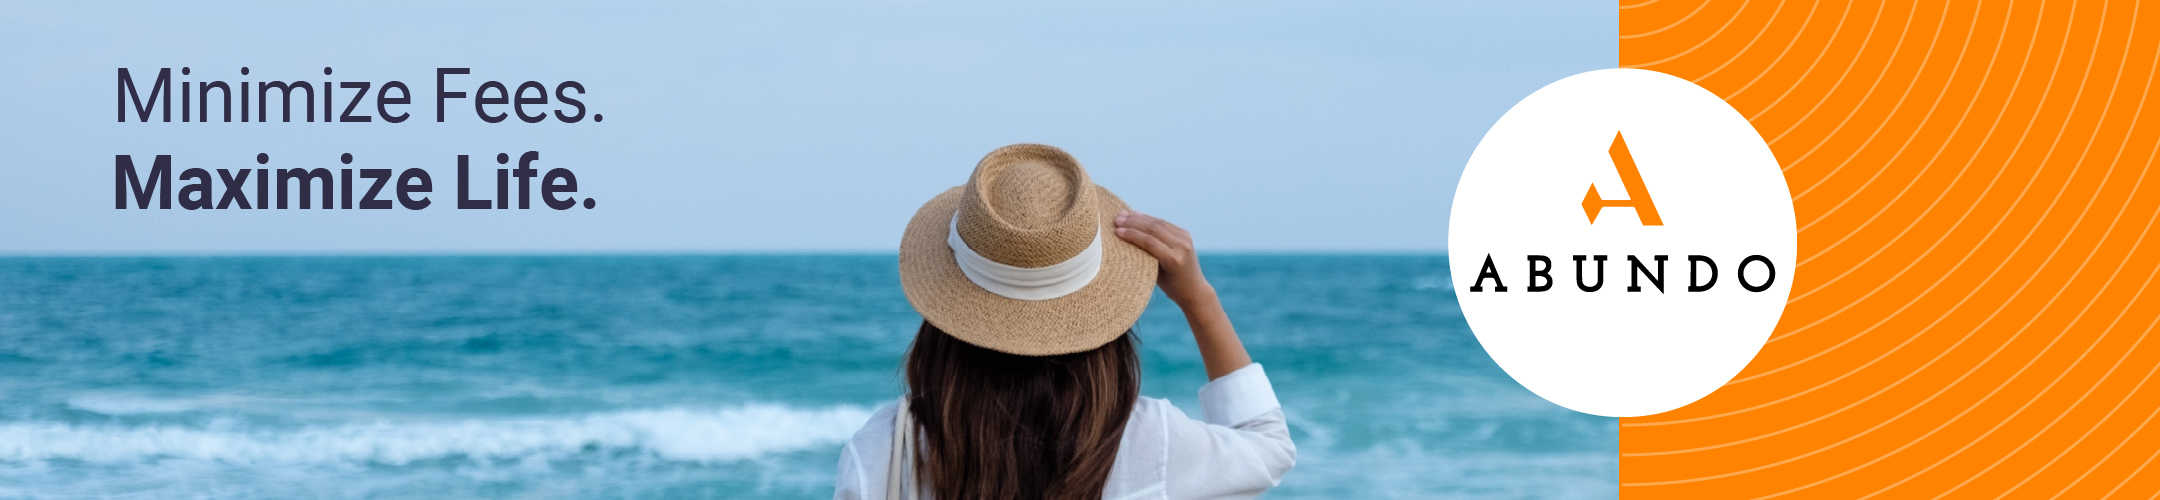 A serene scene: a person donning a hat gazes out at the expansive ocean, contemplating life, as the slogan 